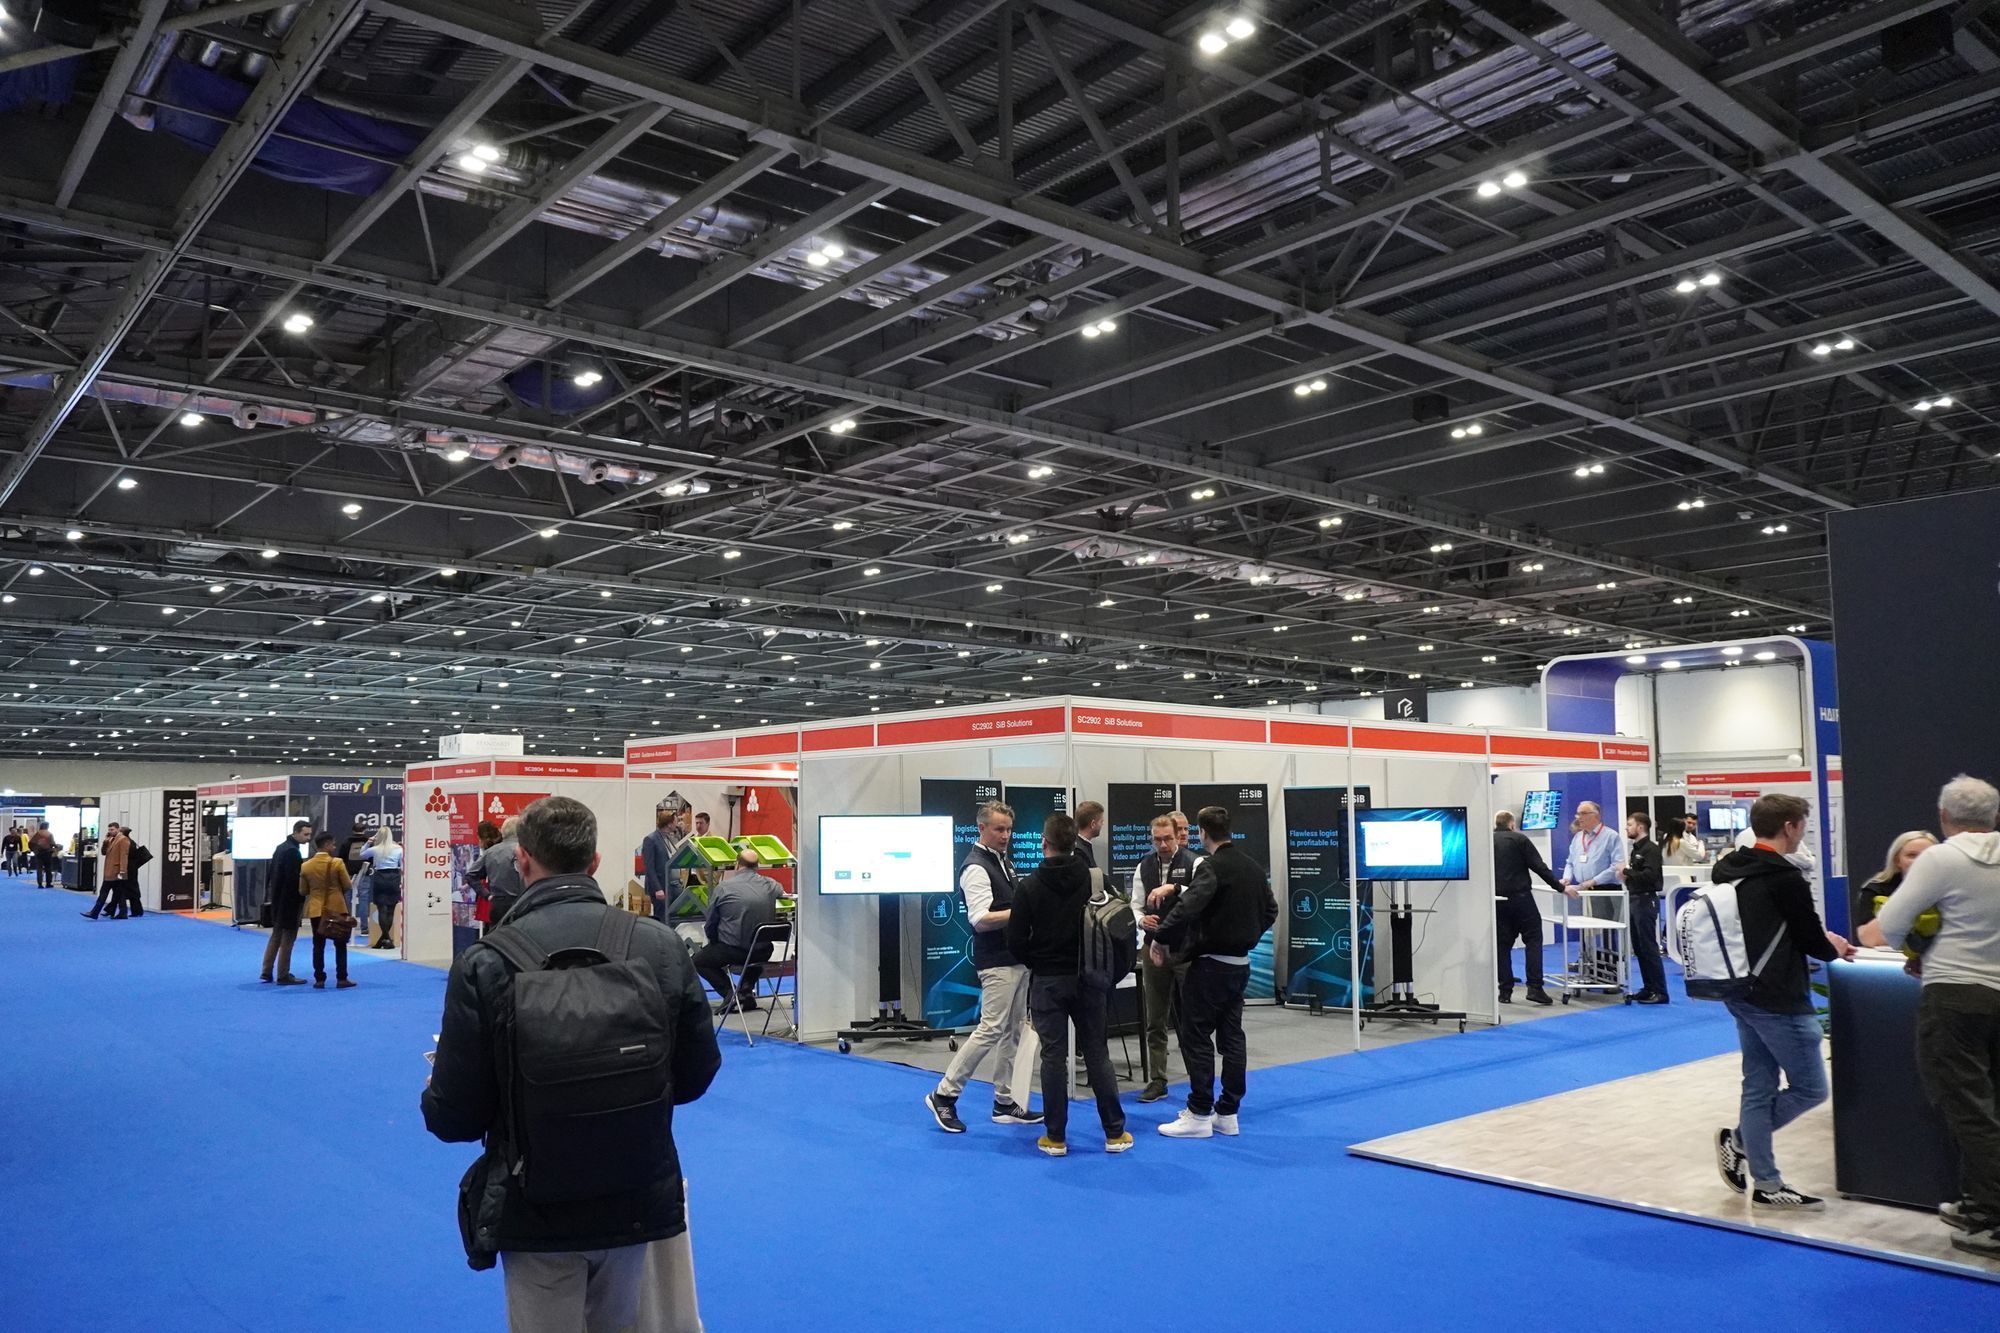 The expansive size of the Smart Retail Tech Expo, with other booths visible in the background